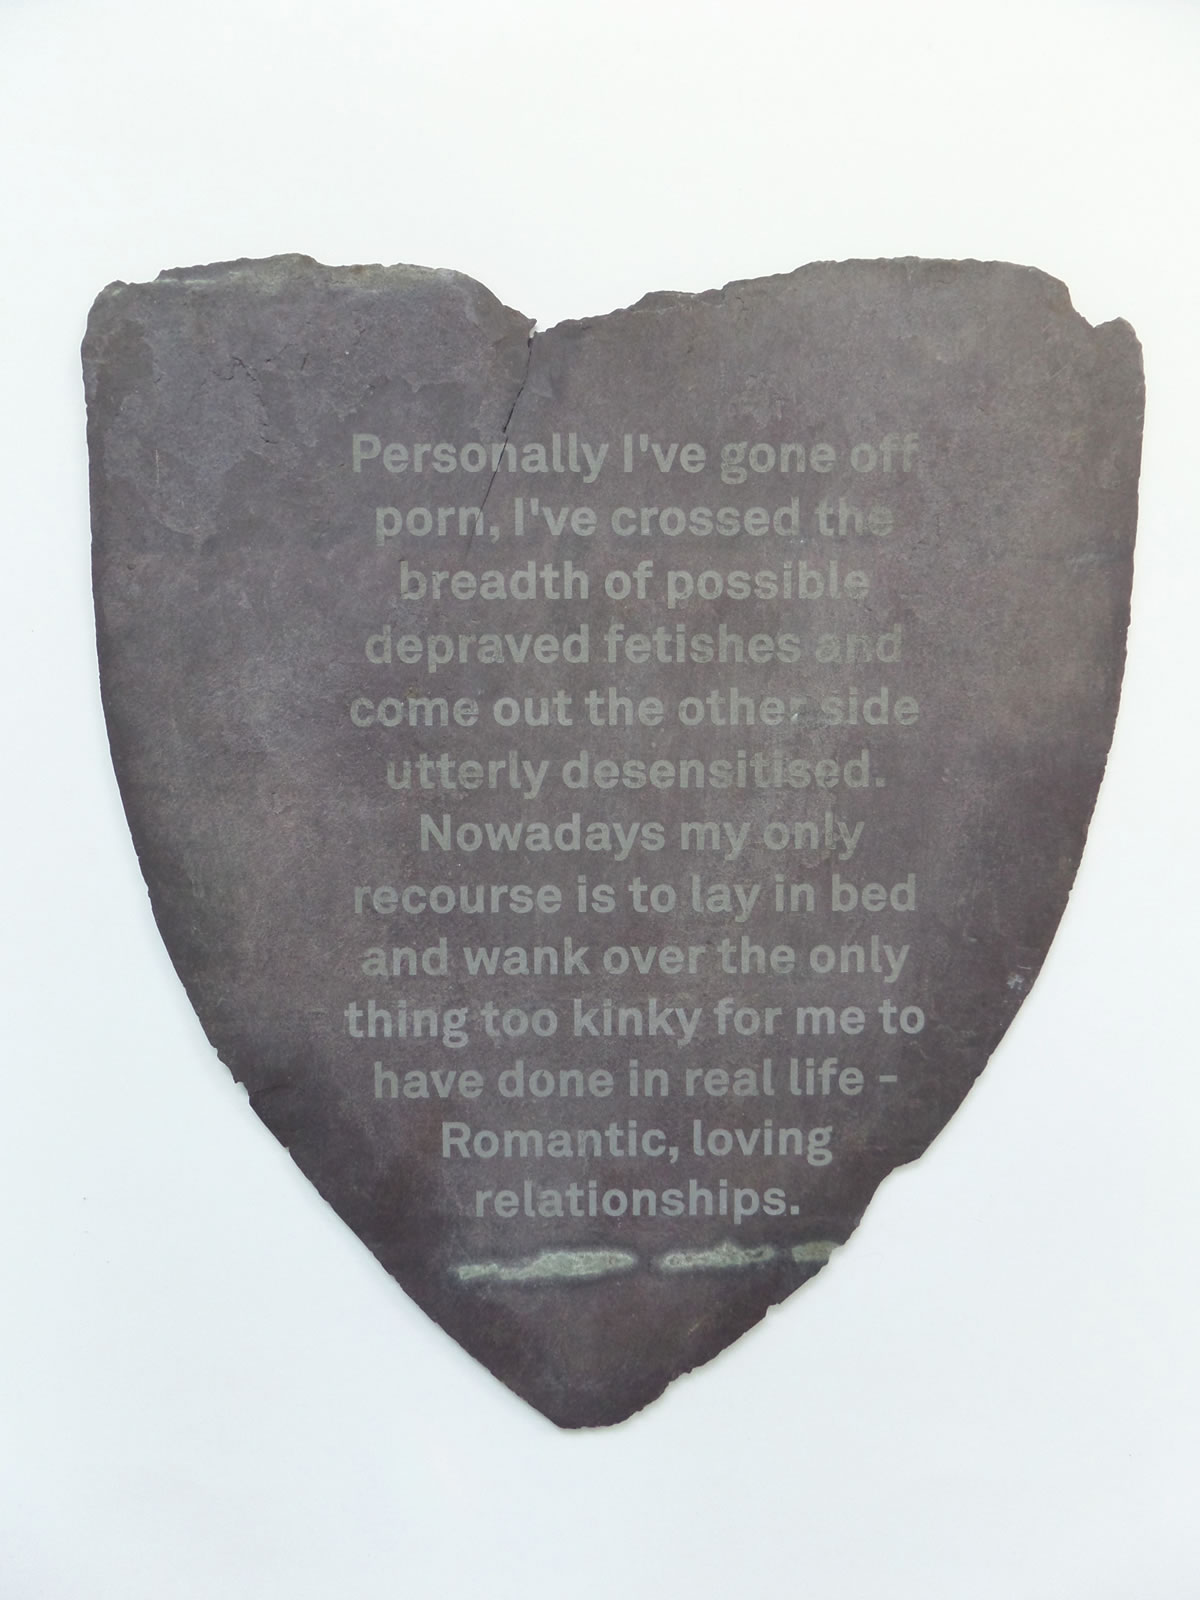 'Romance' - Laser engraved text from internet on found slate, 2014